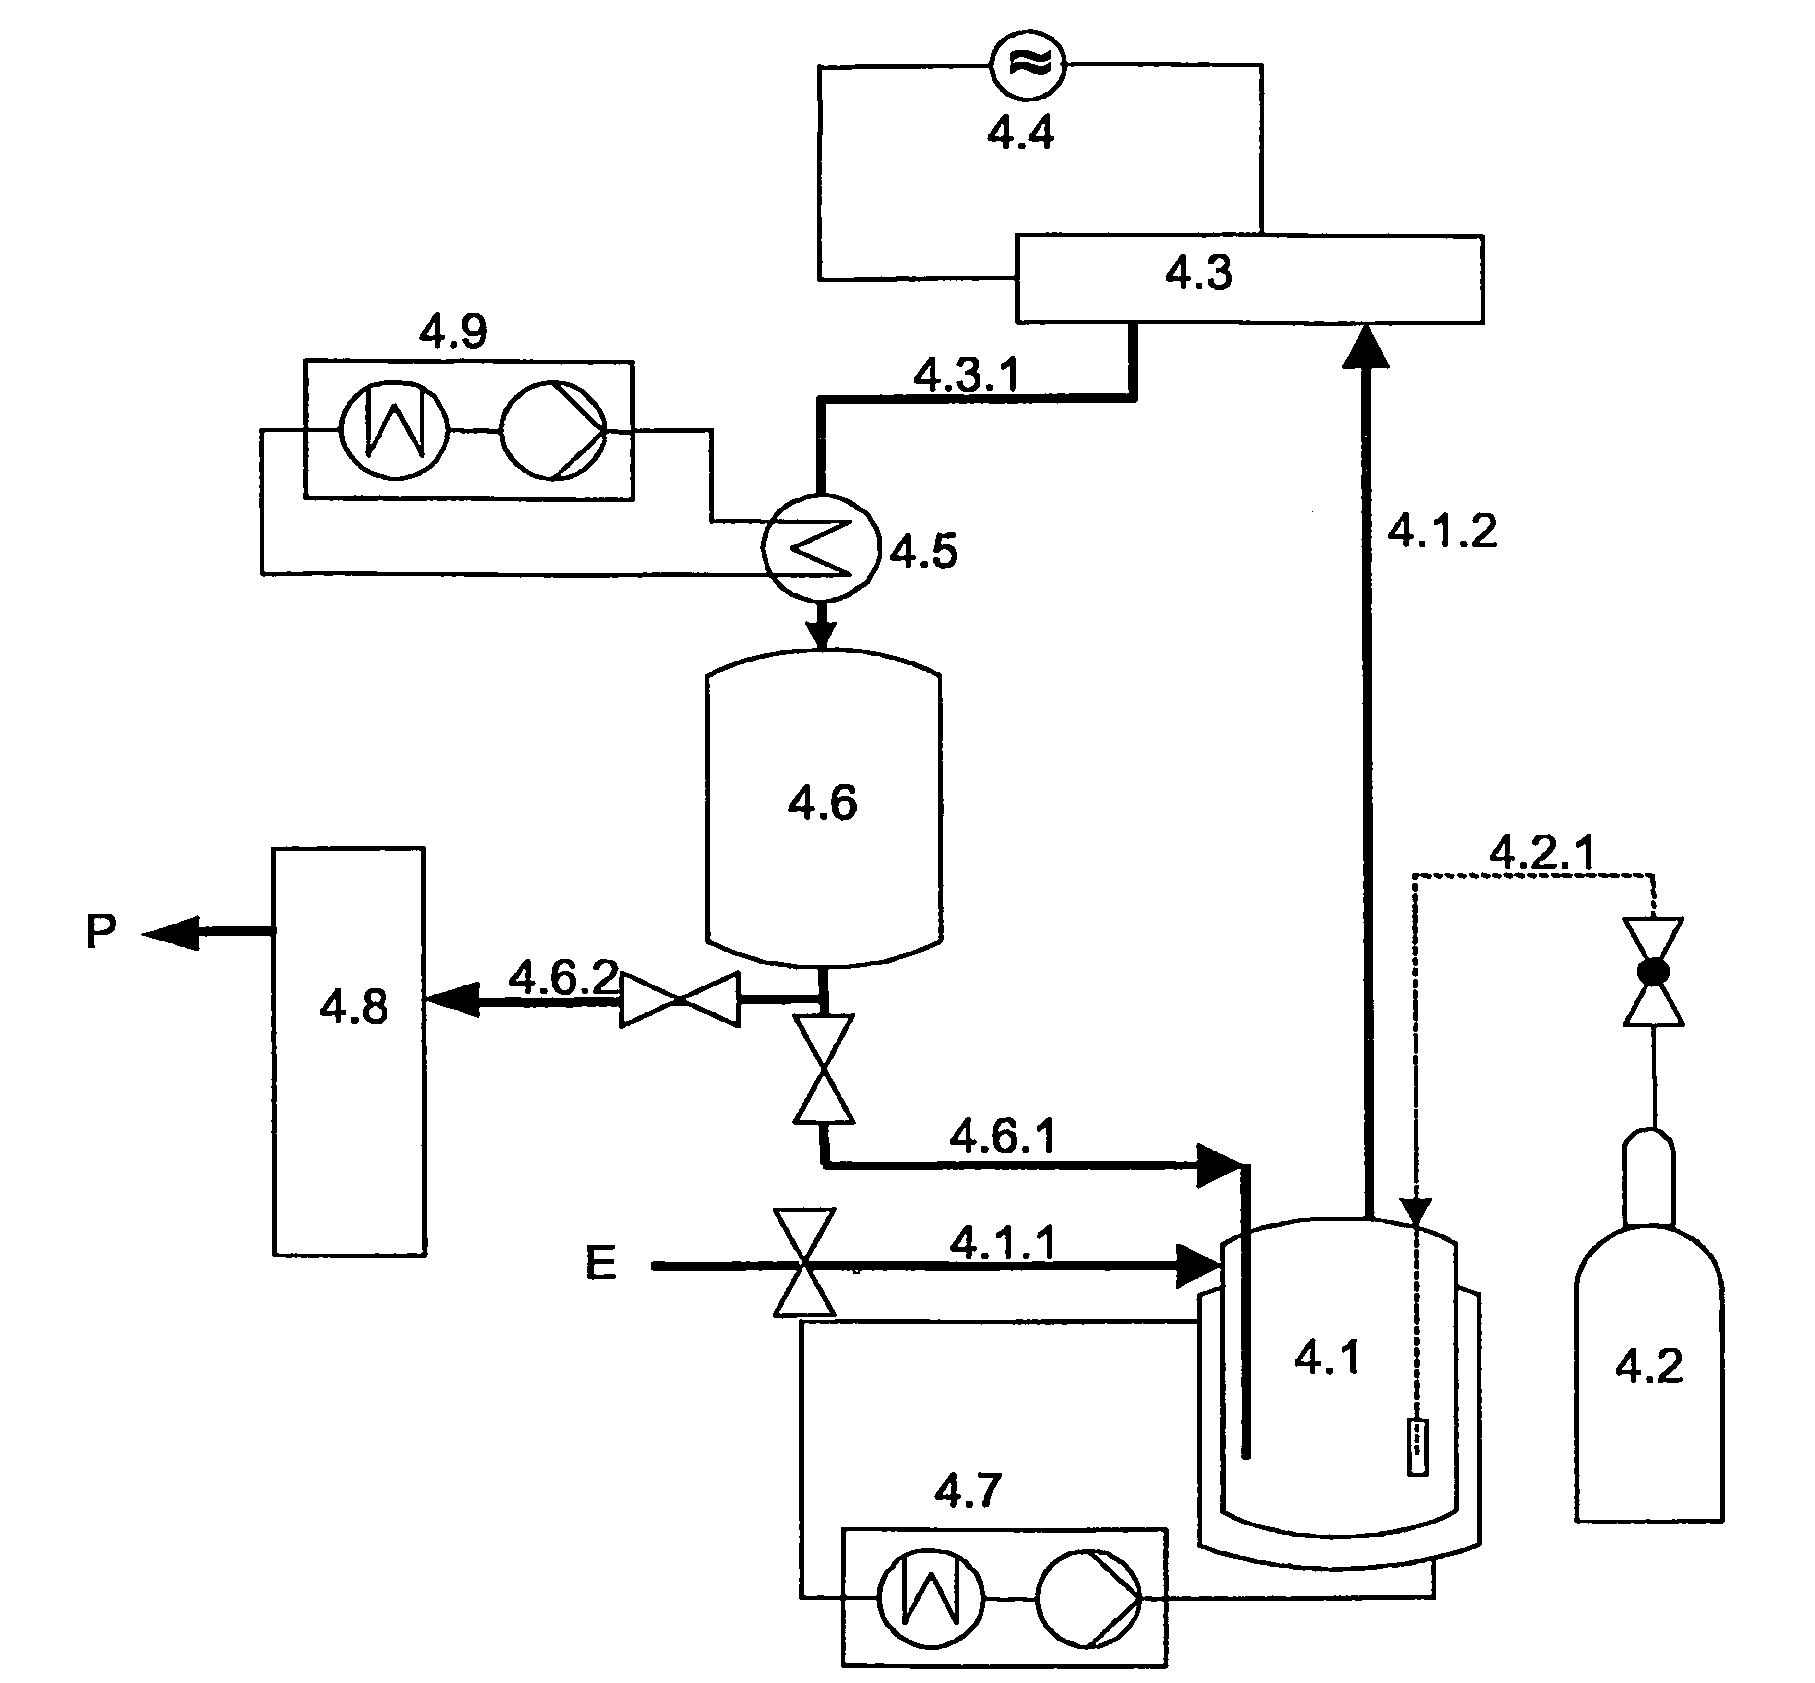 Process and apparatus for purifying silicon tetrachloride or germanium tetrachloride containing hydrogen compounds